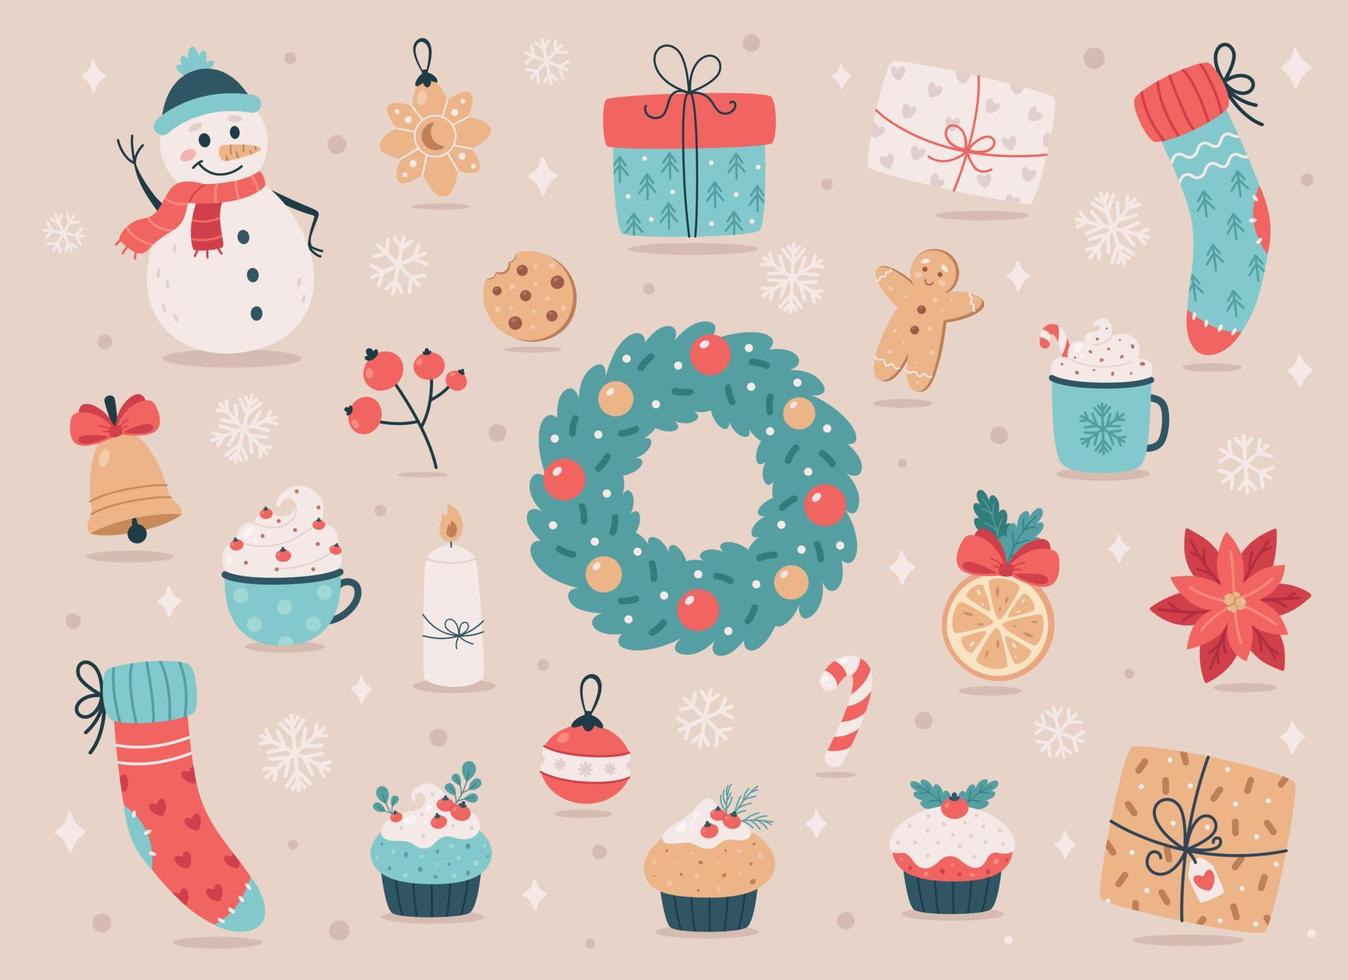 Christmas elements collection. Merry Christmas, Happy New Year objects vector